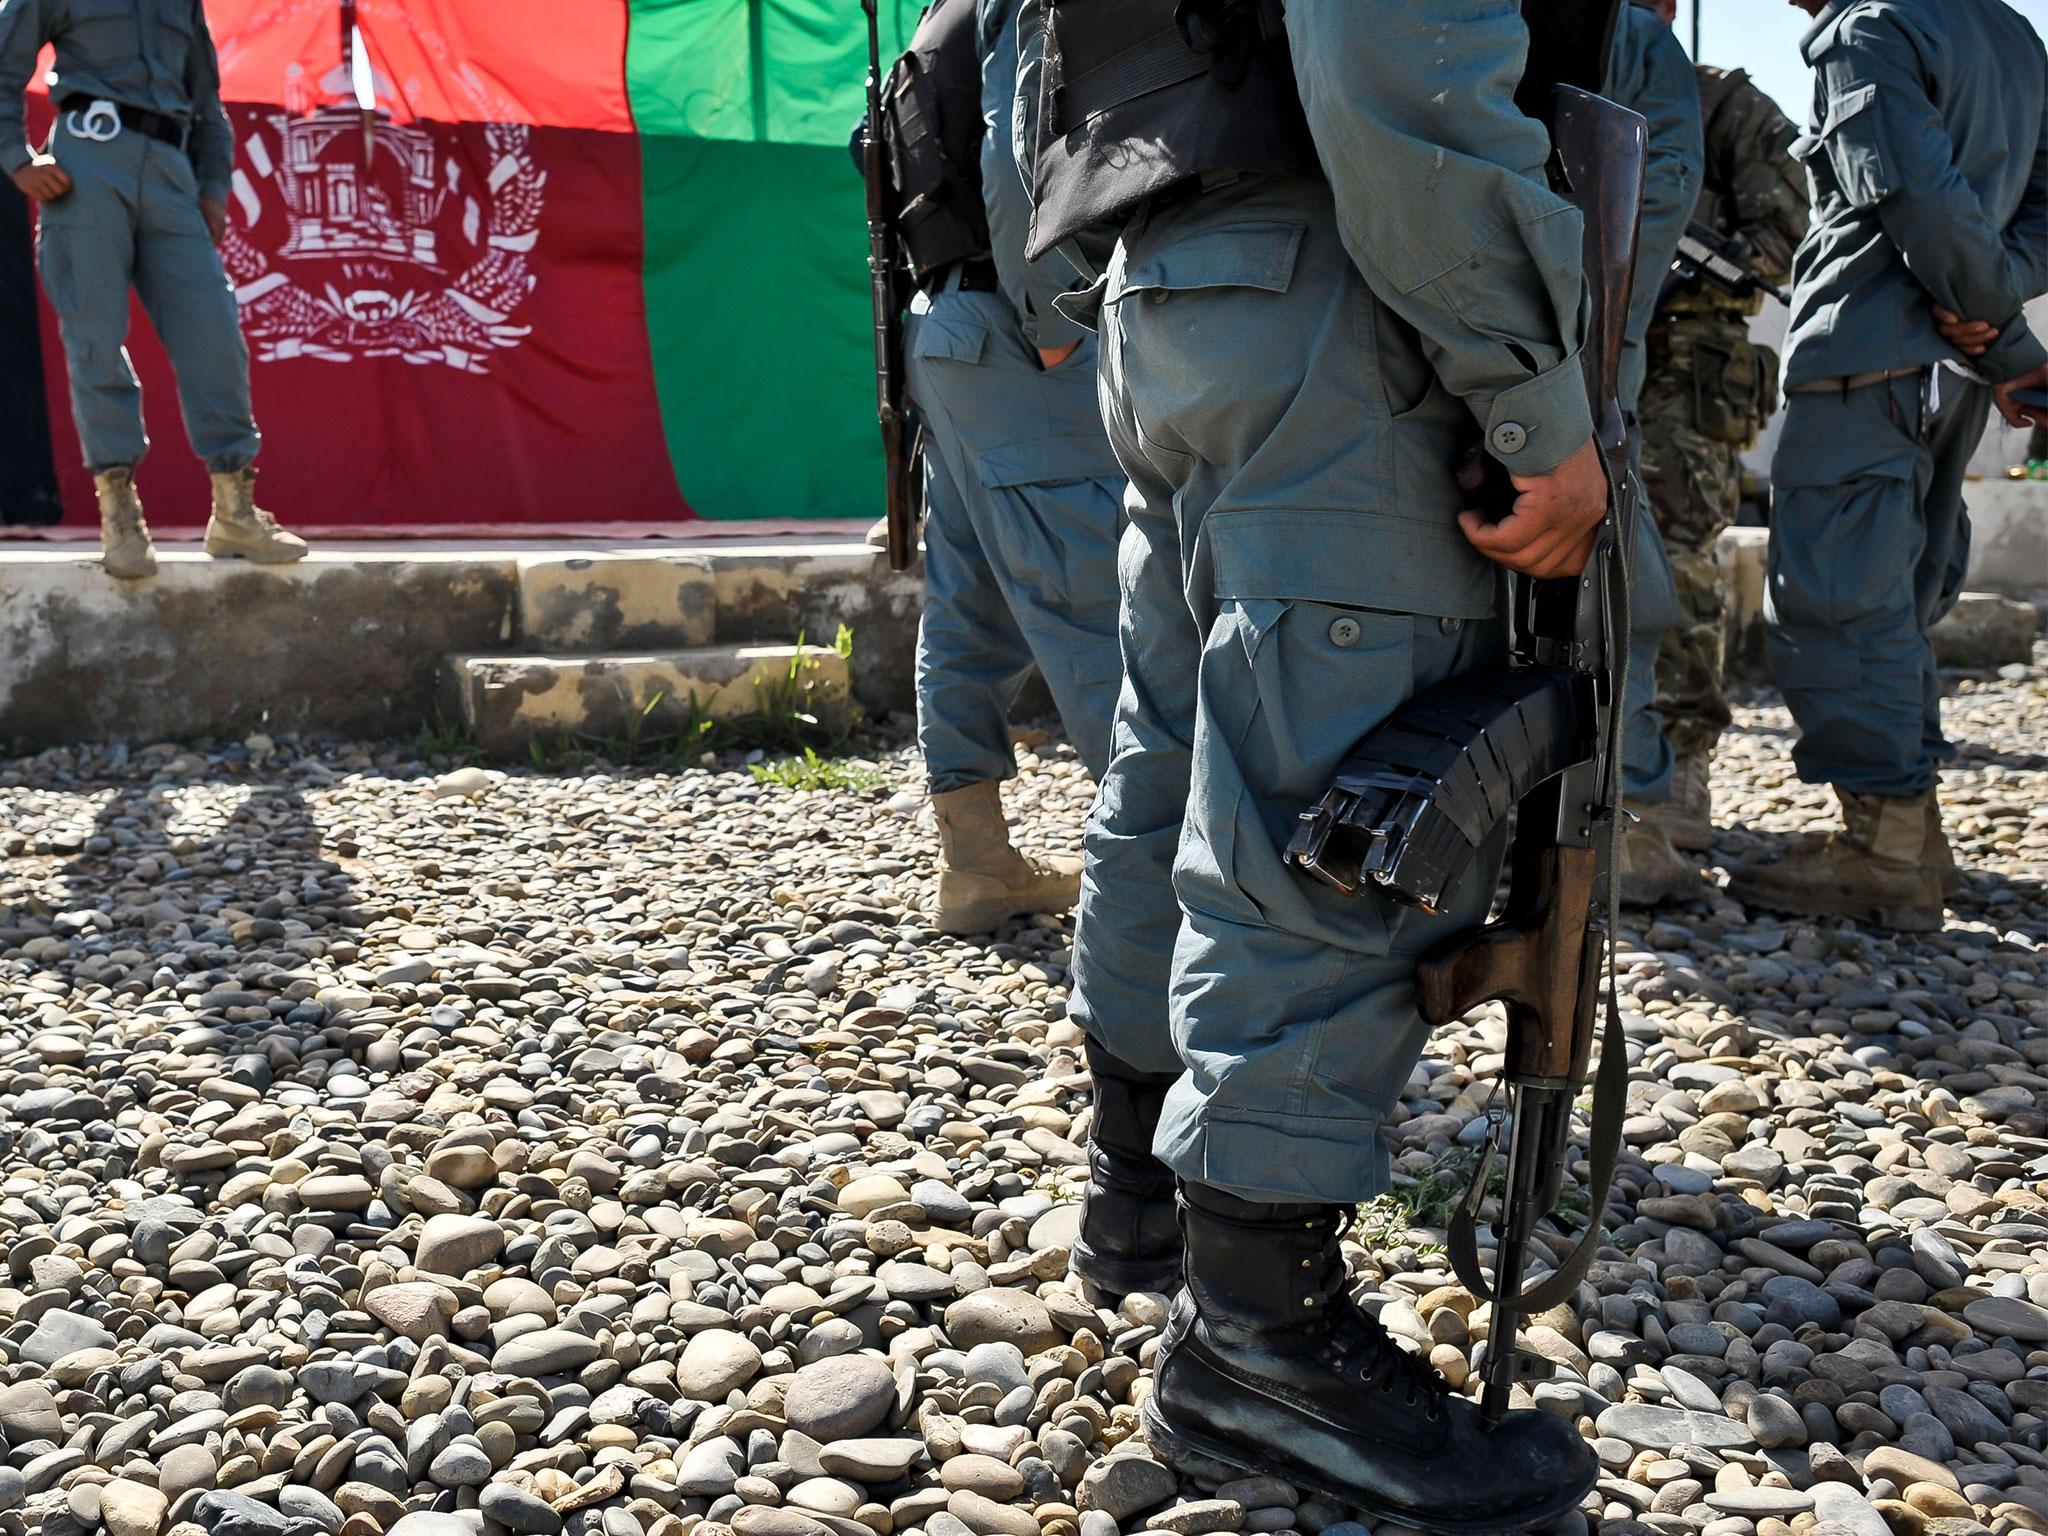 Senior officers expressed anger over the Governmen'ts decision to deny two former Afghan interpreters the right to live in the UK